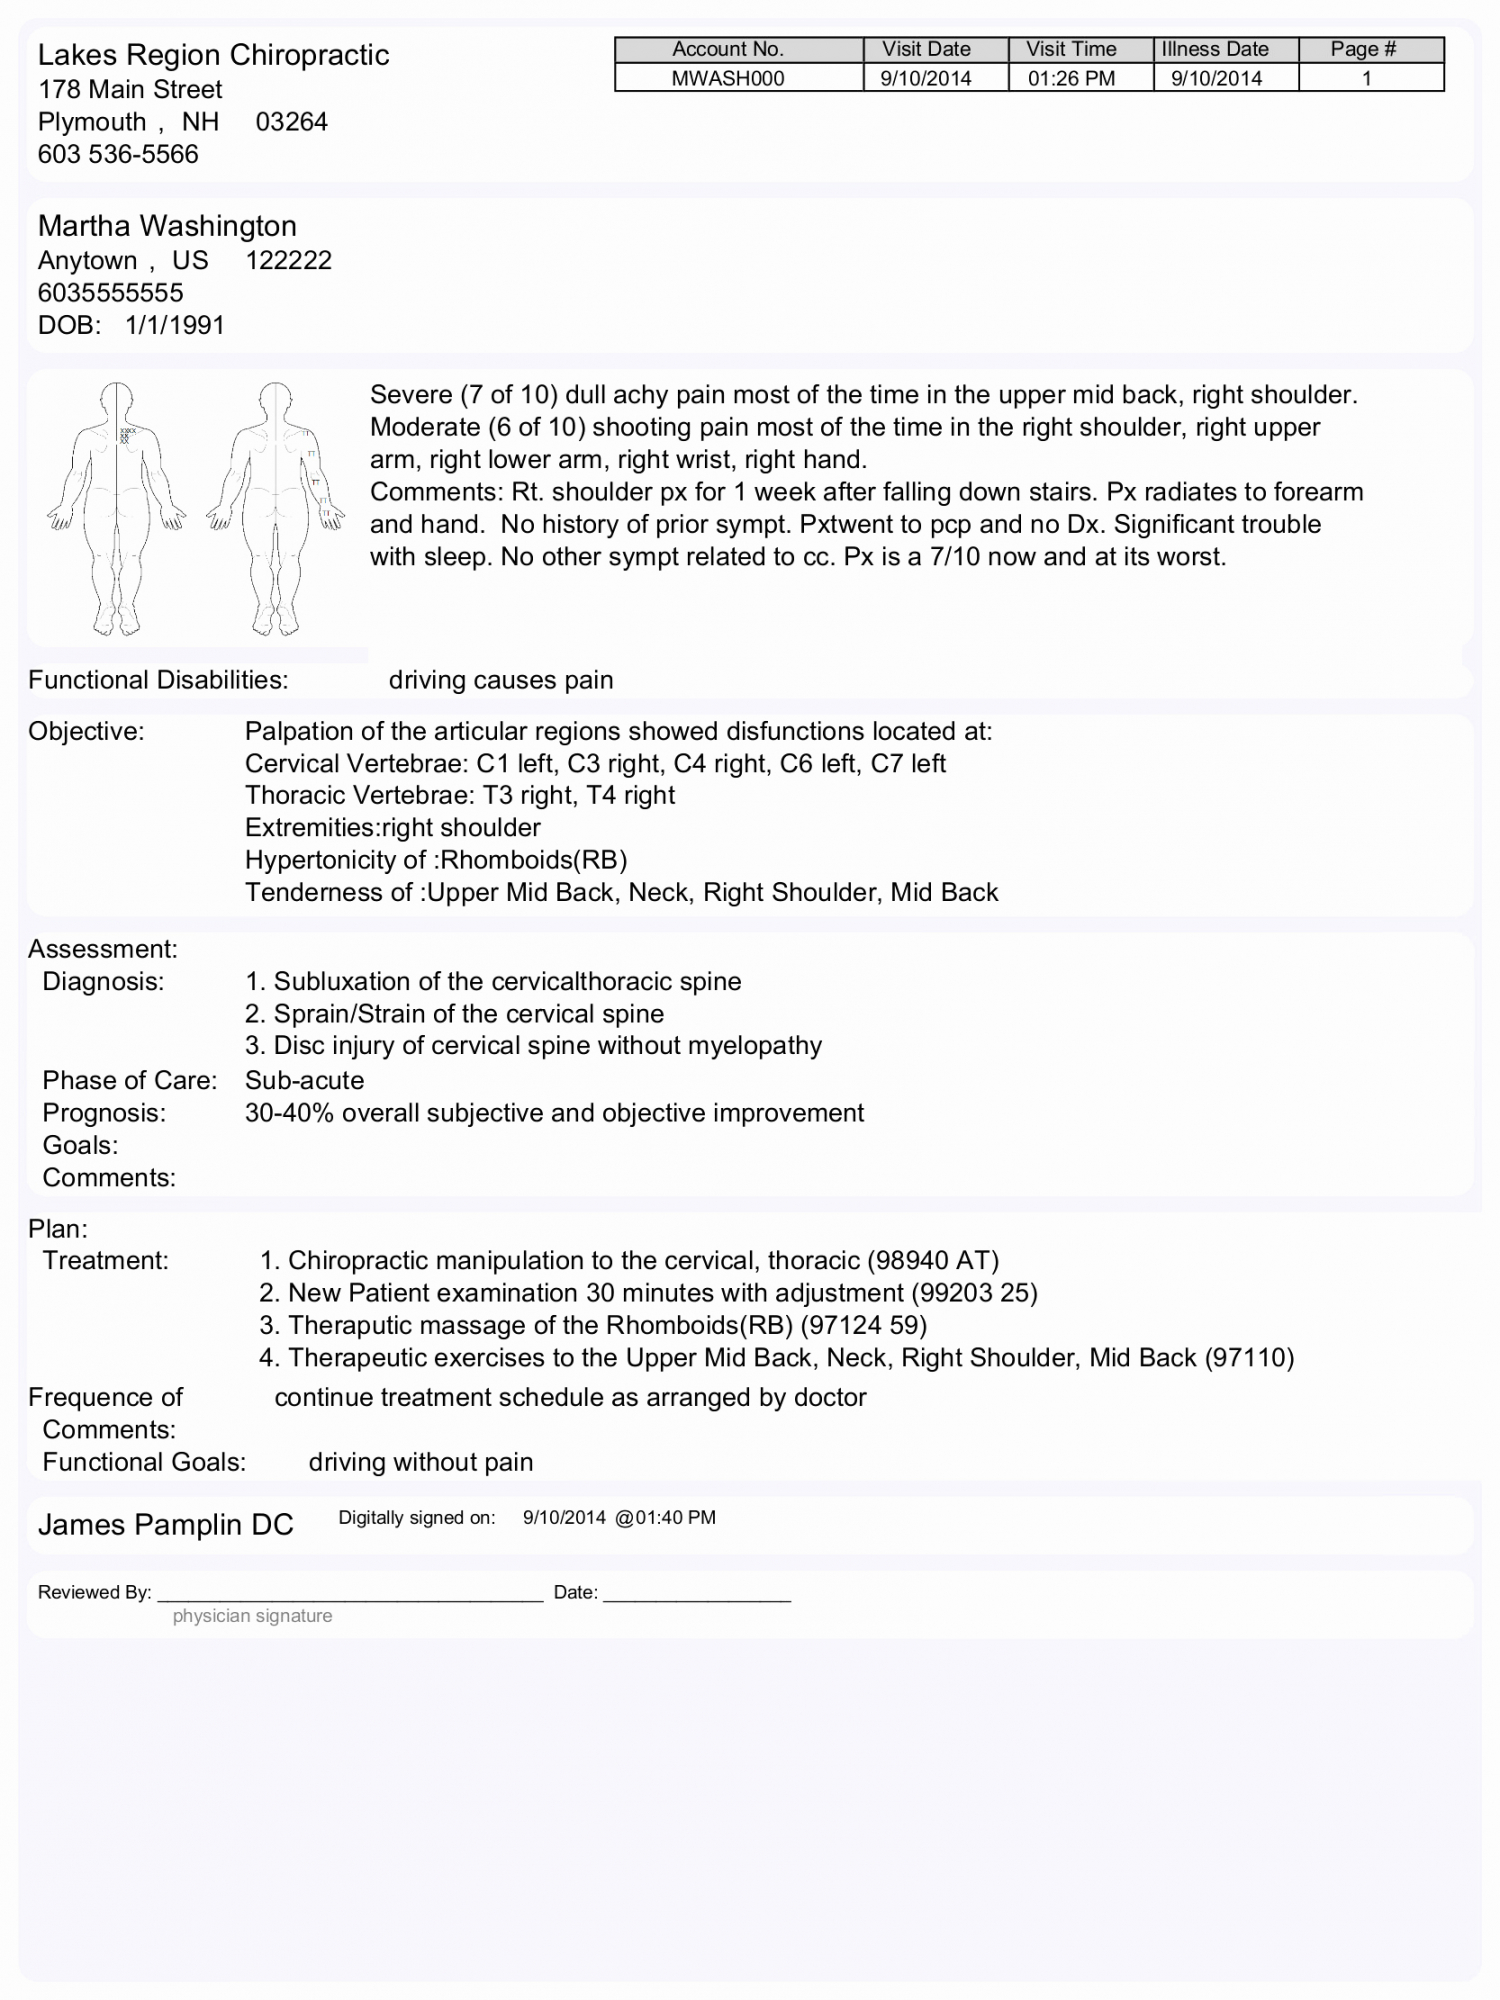 printable 35 chiropractic soap note example  hamiltonplastering chiropractic soap note template excel